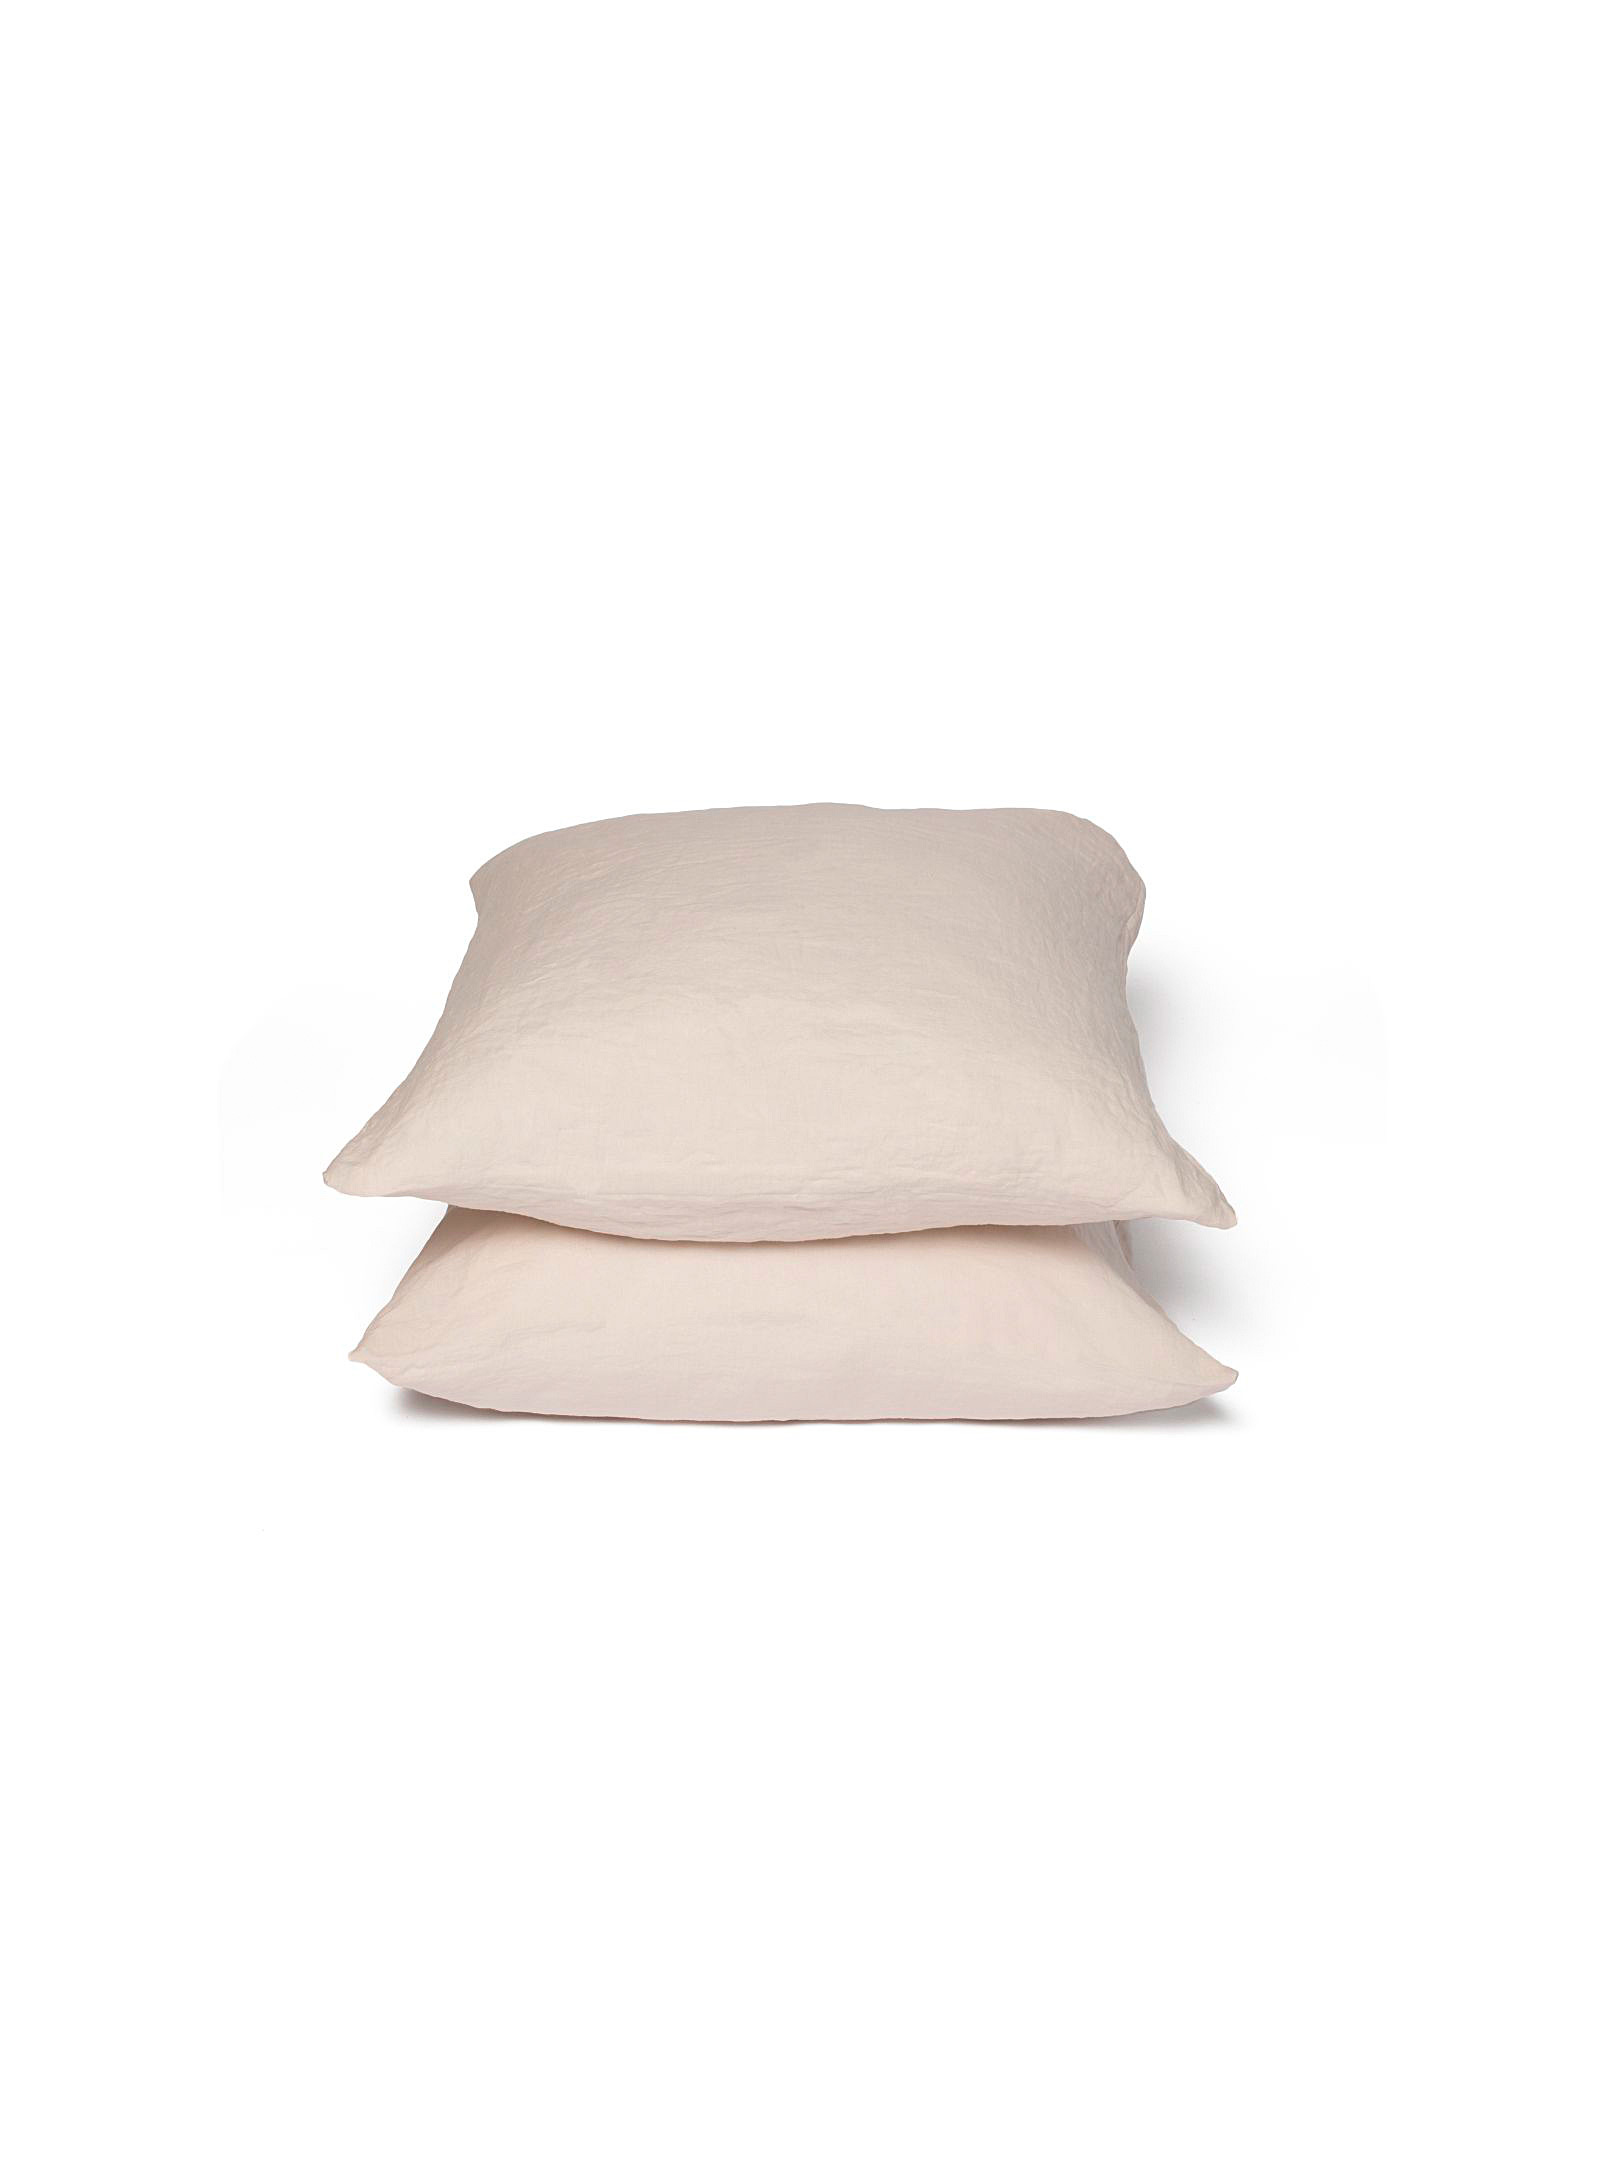 Wilet Pre-washed Pure Linen Euro Pillow Shams Set Of 2 In Neutral